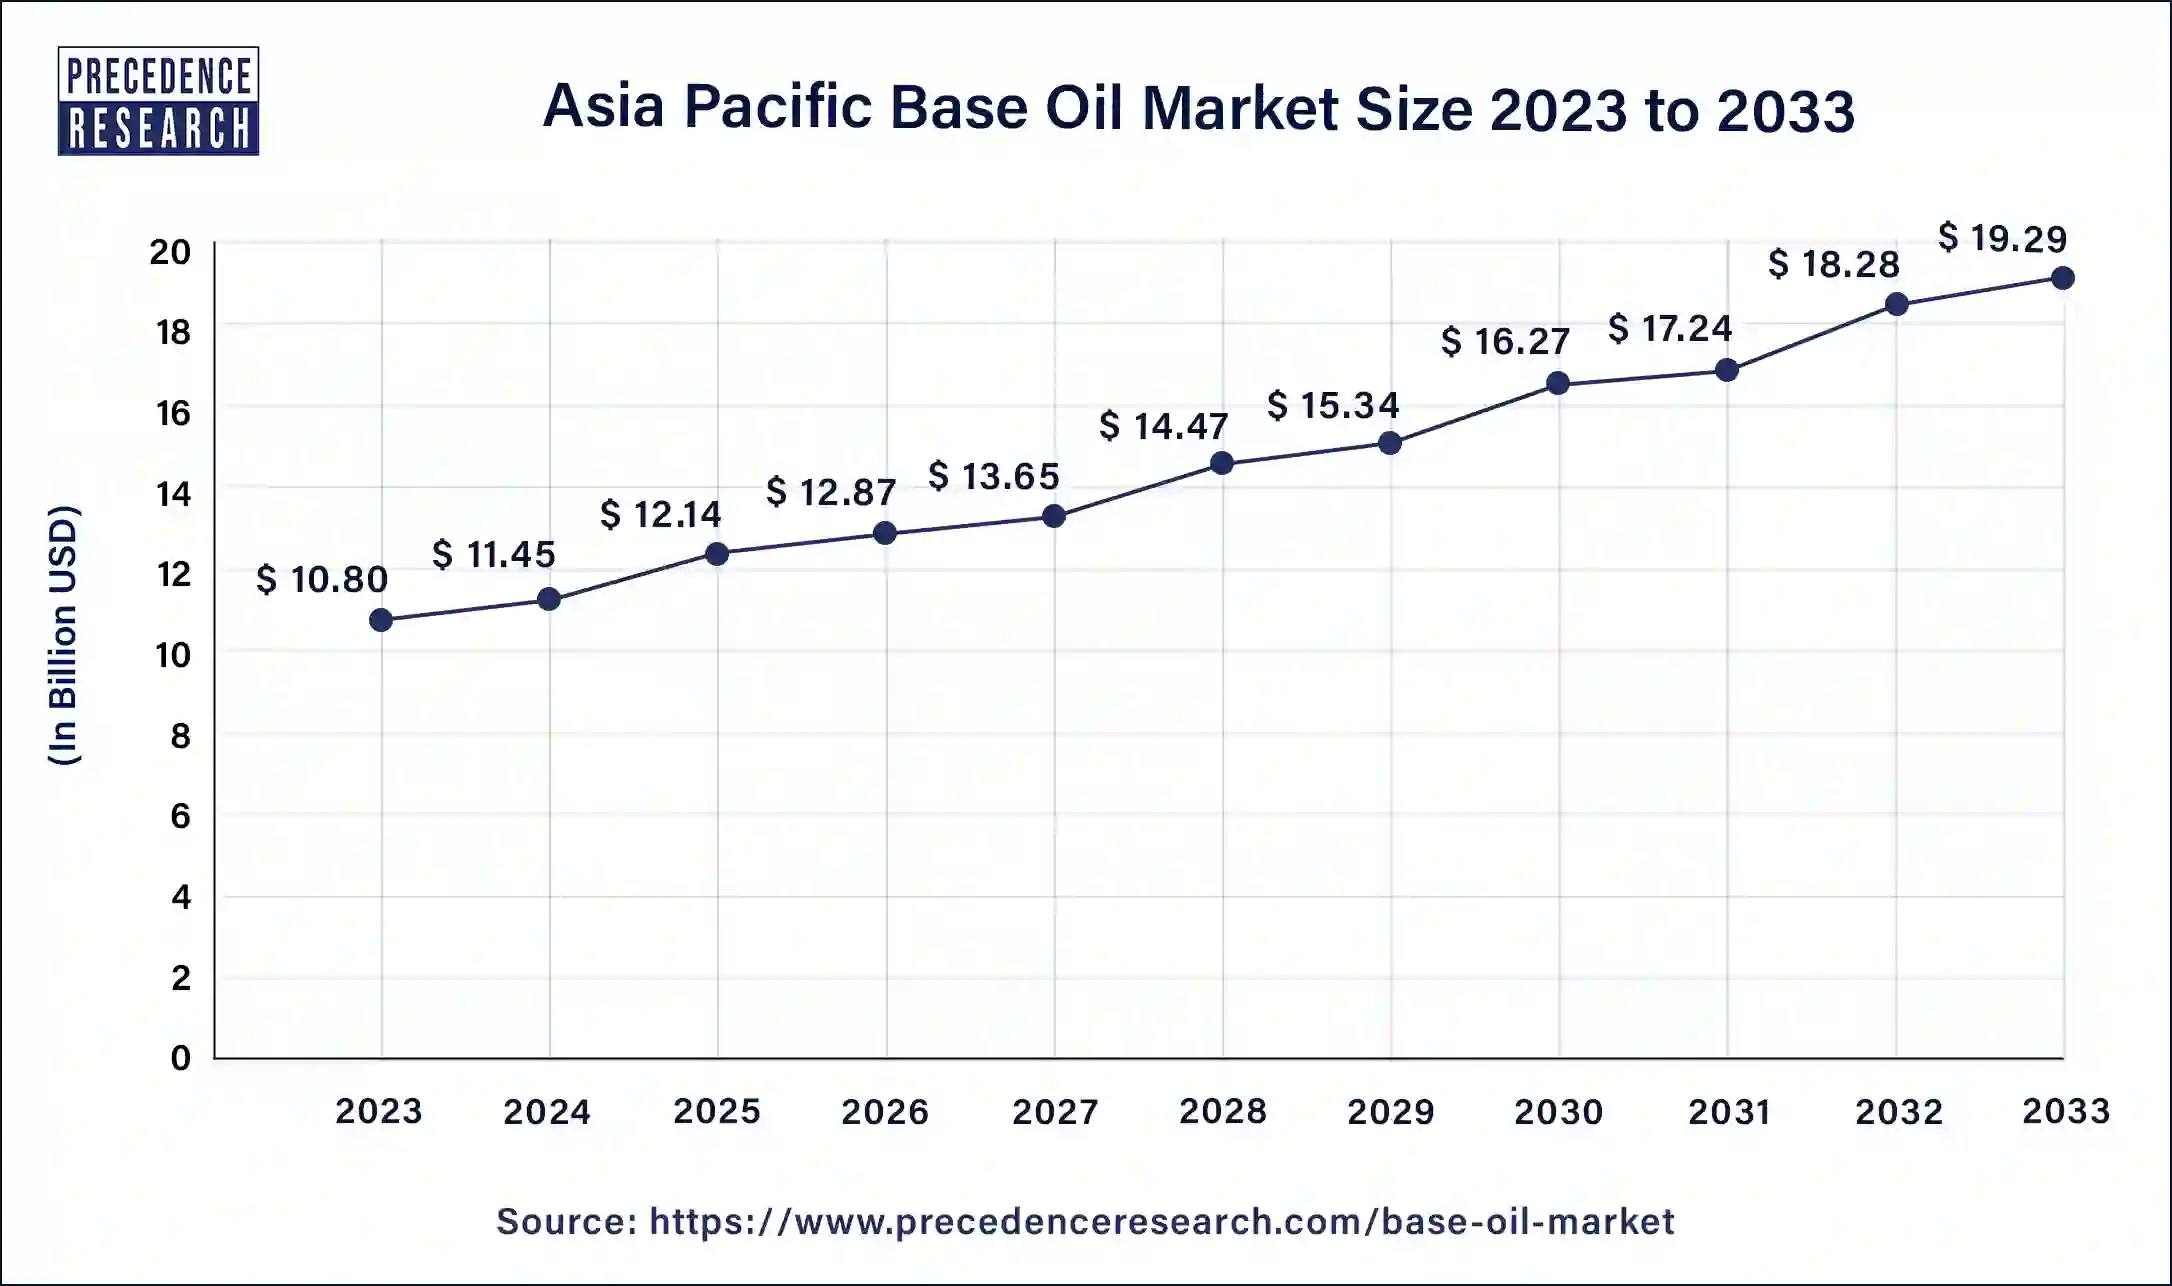 Asia Pacific Base Oil Market Size 2024 to 2033